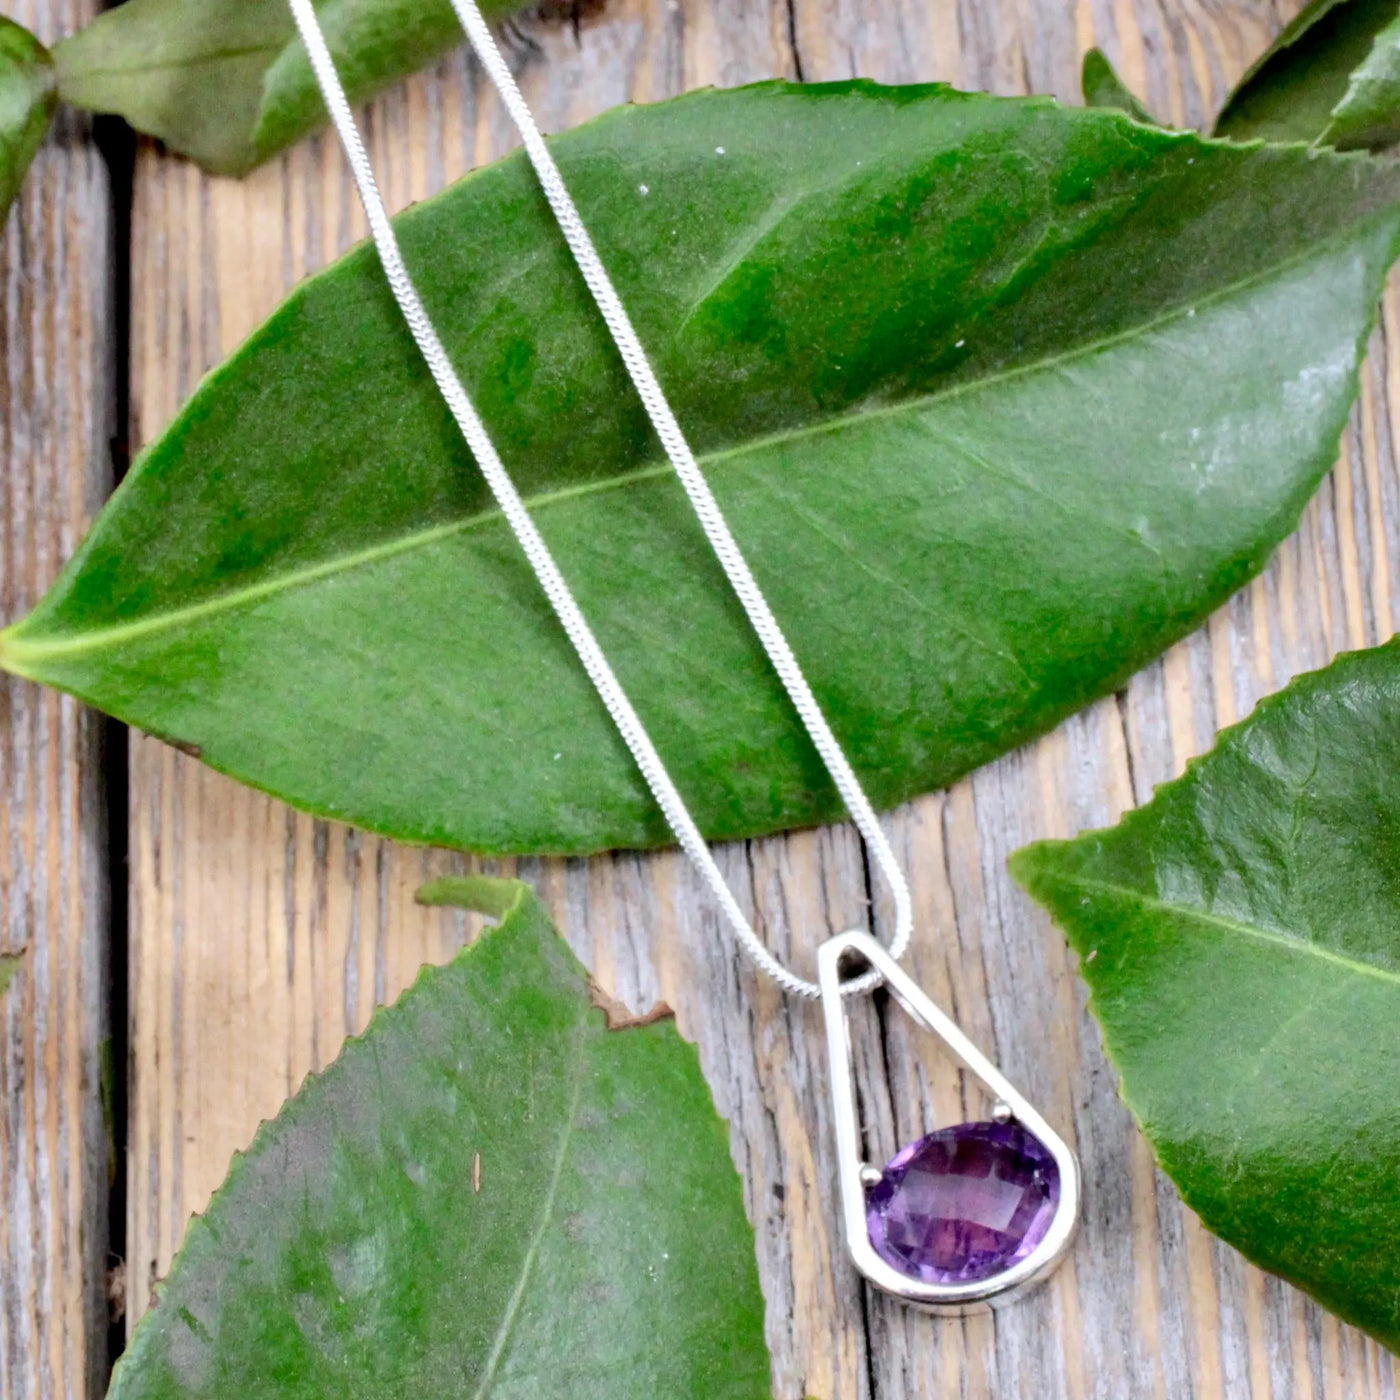 Faceted Amethyst Drop Pendant - Sterling Silver